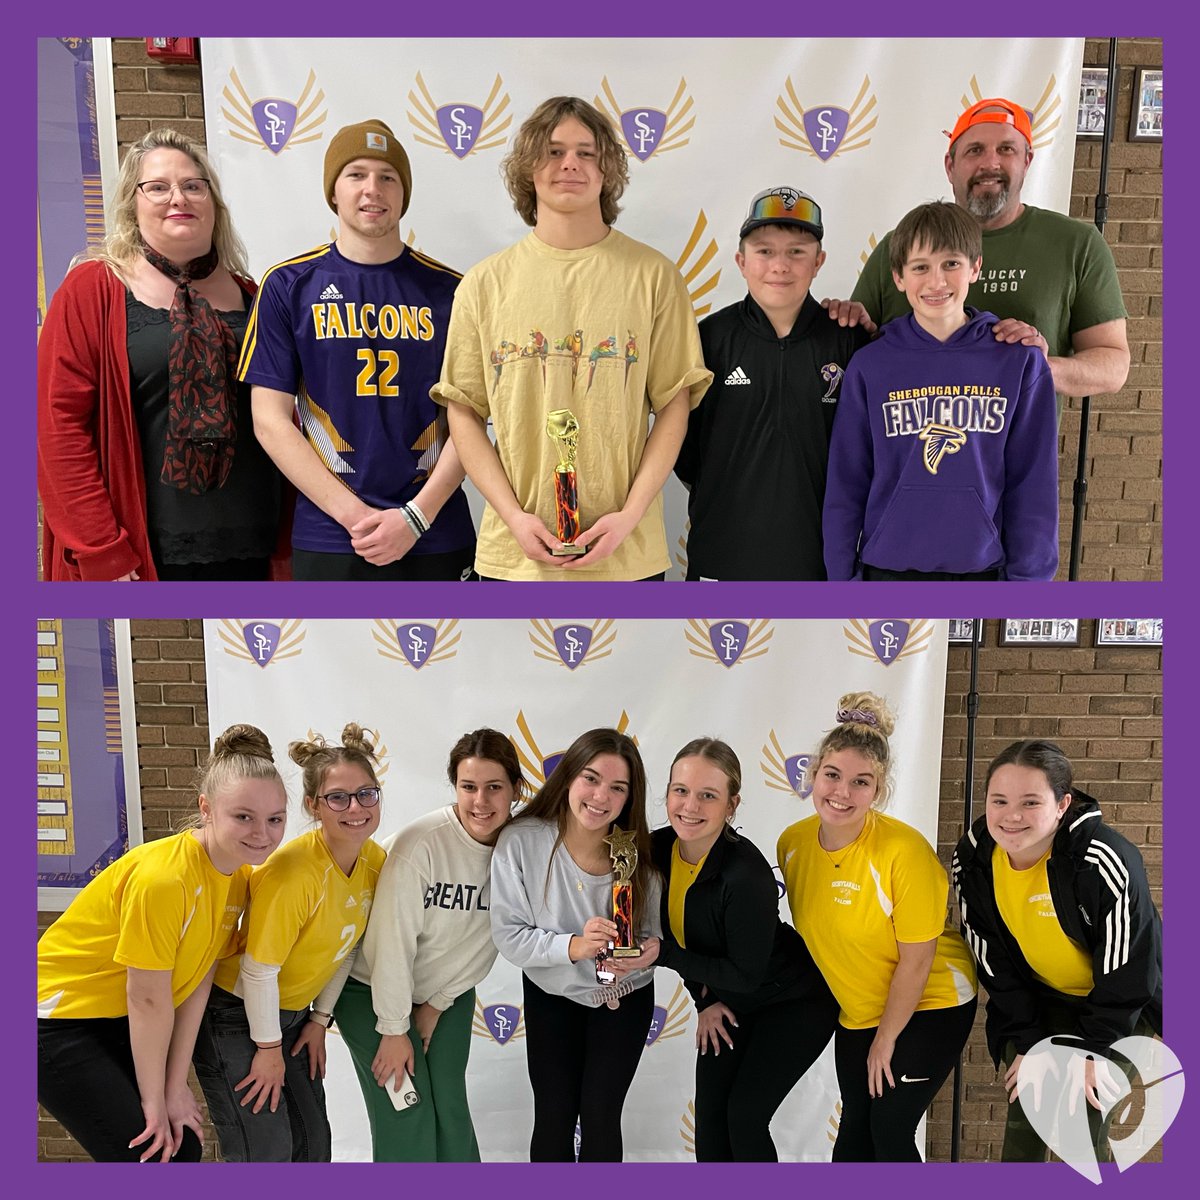 Thank you to all 9 teams who participated in the 1st Annual Booster Club Chili Cookoff! Chili Champions: 1st place- Boys Soccer 2nd place - Football 3rd place- Baseball Chili Spirit Award: 1st place - Girls Soccer 2nd place - Baseball 3rd place - Danc